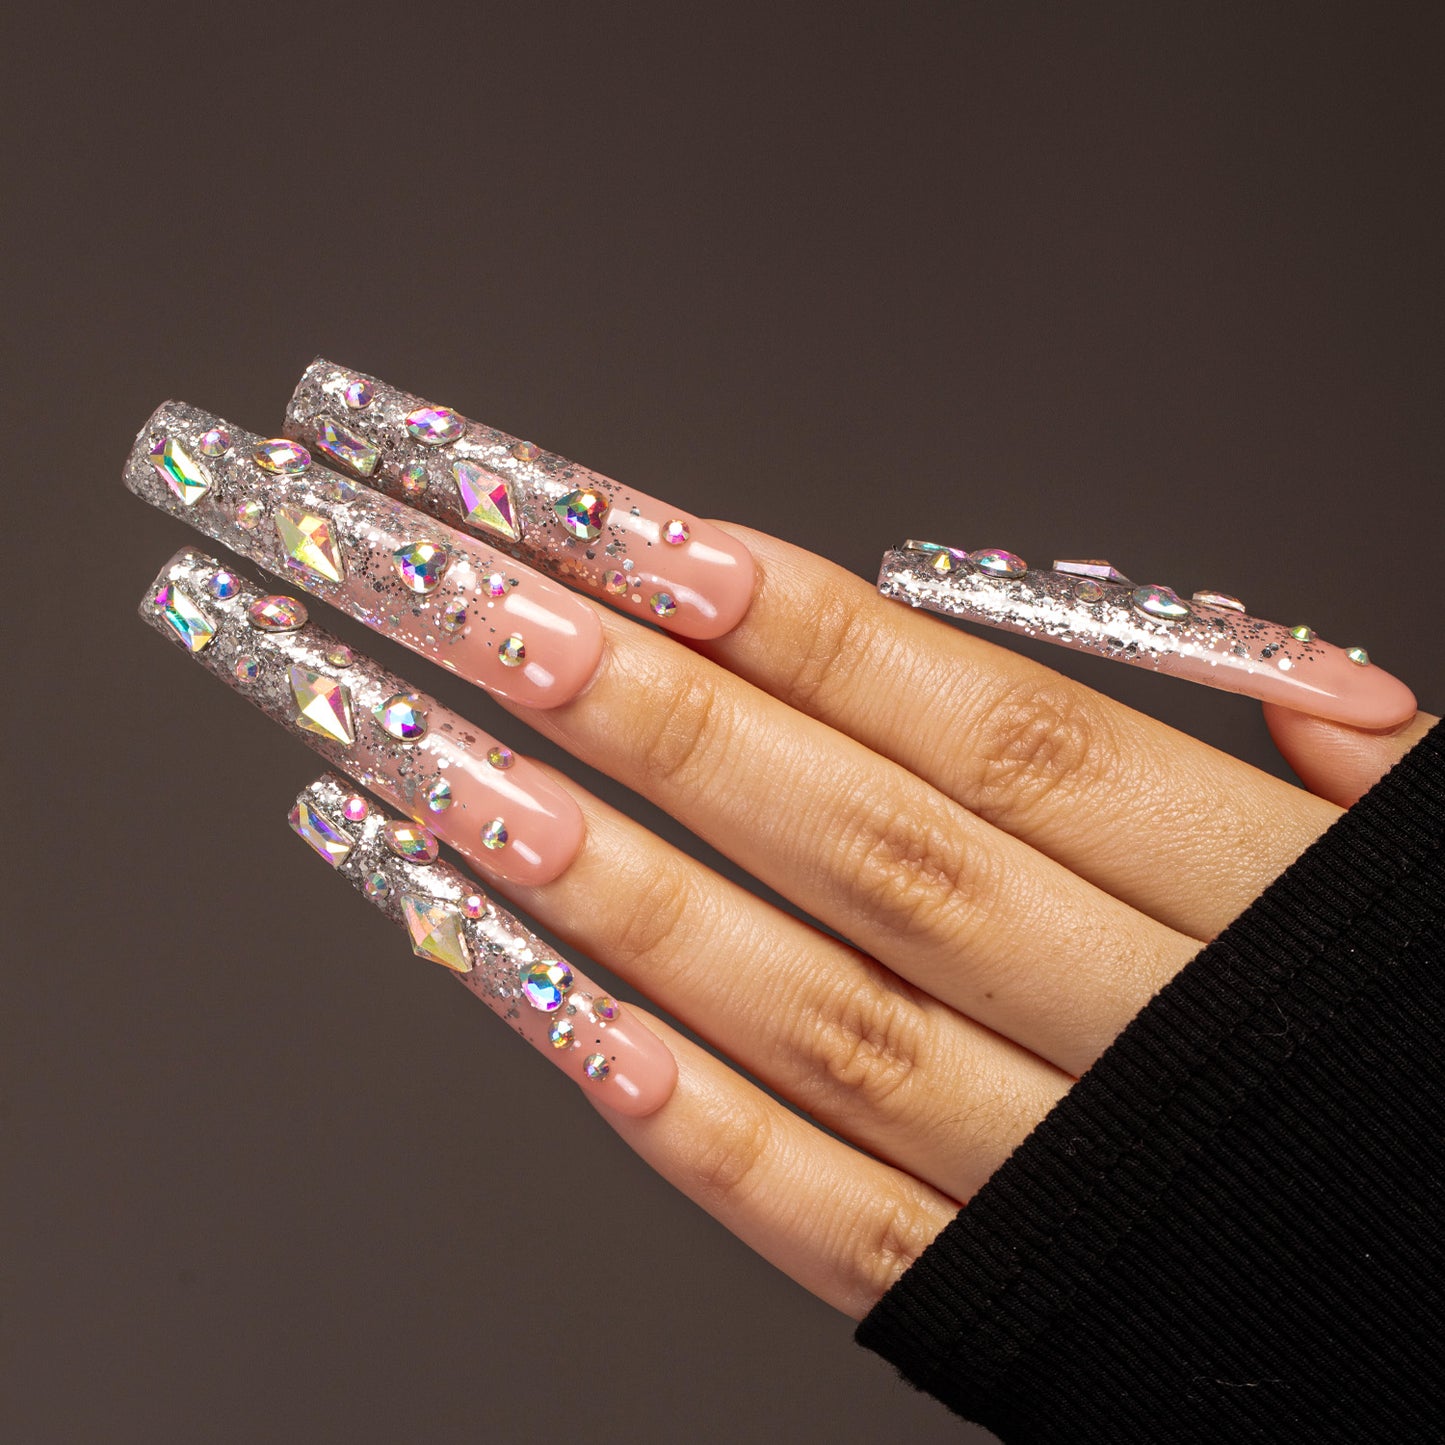 LH2 Hand Made Fashion Long Press On Nails With Silver Glitter Colorful Stones